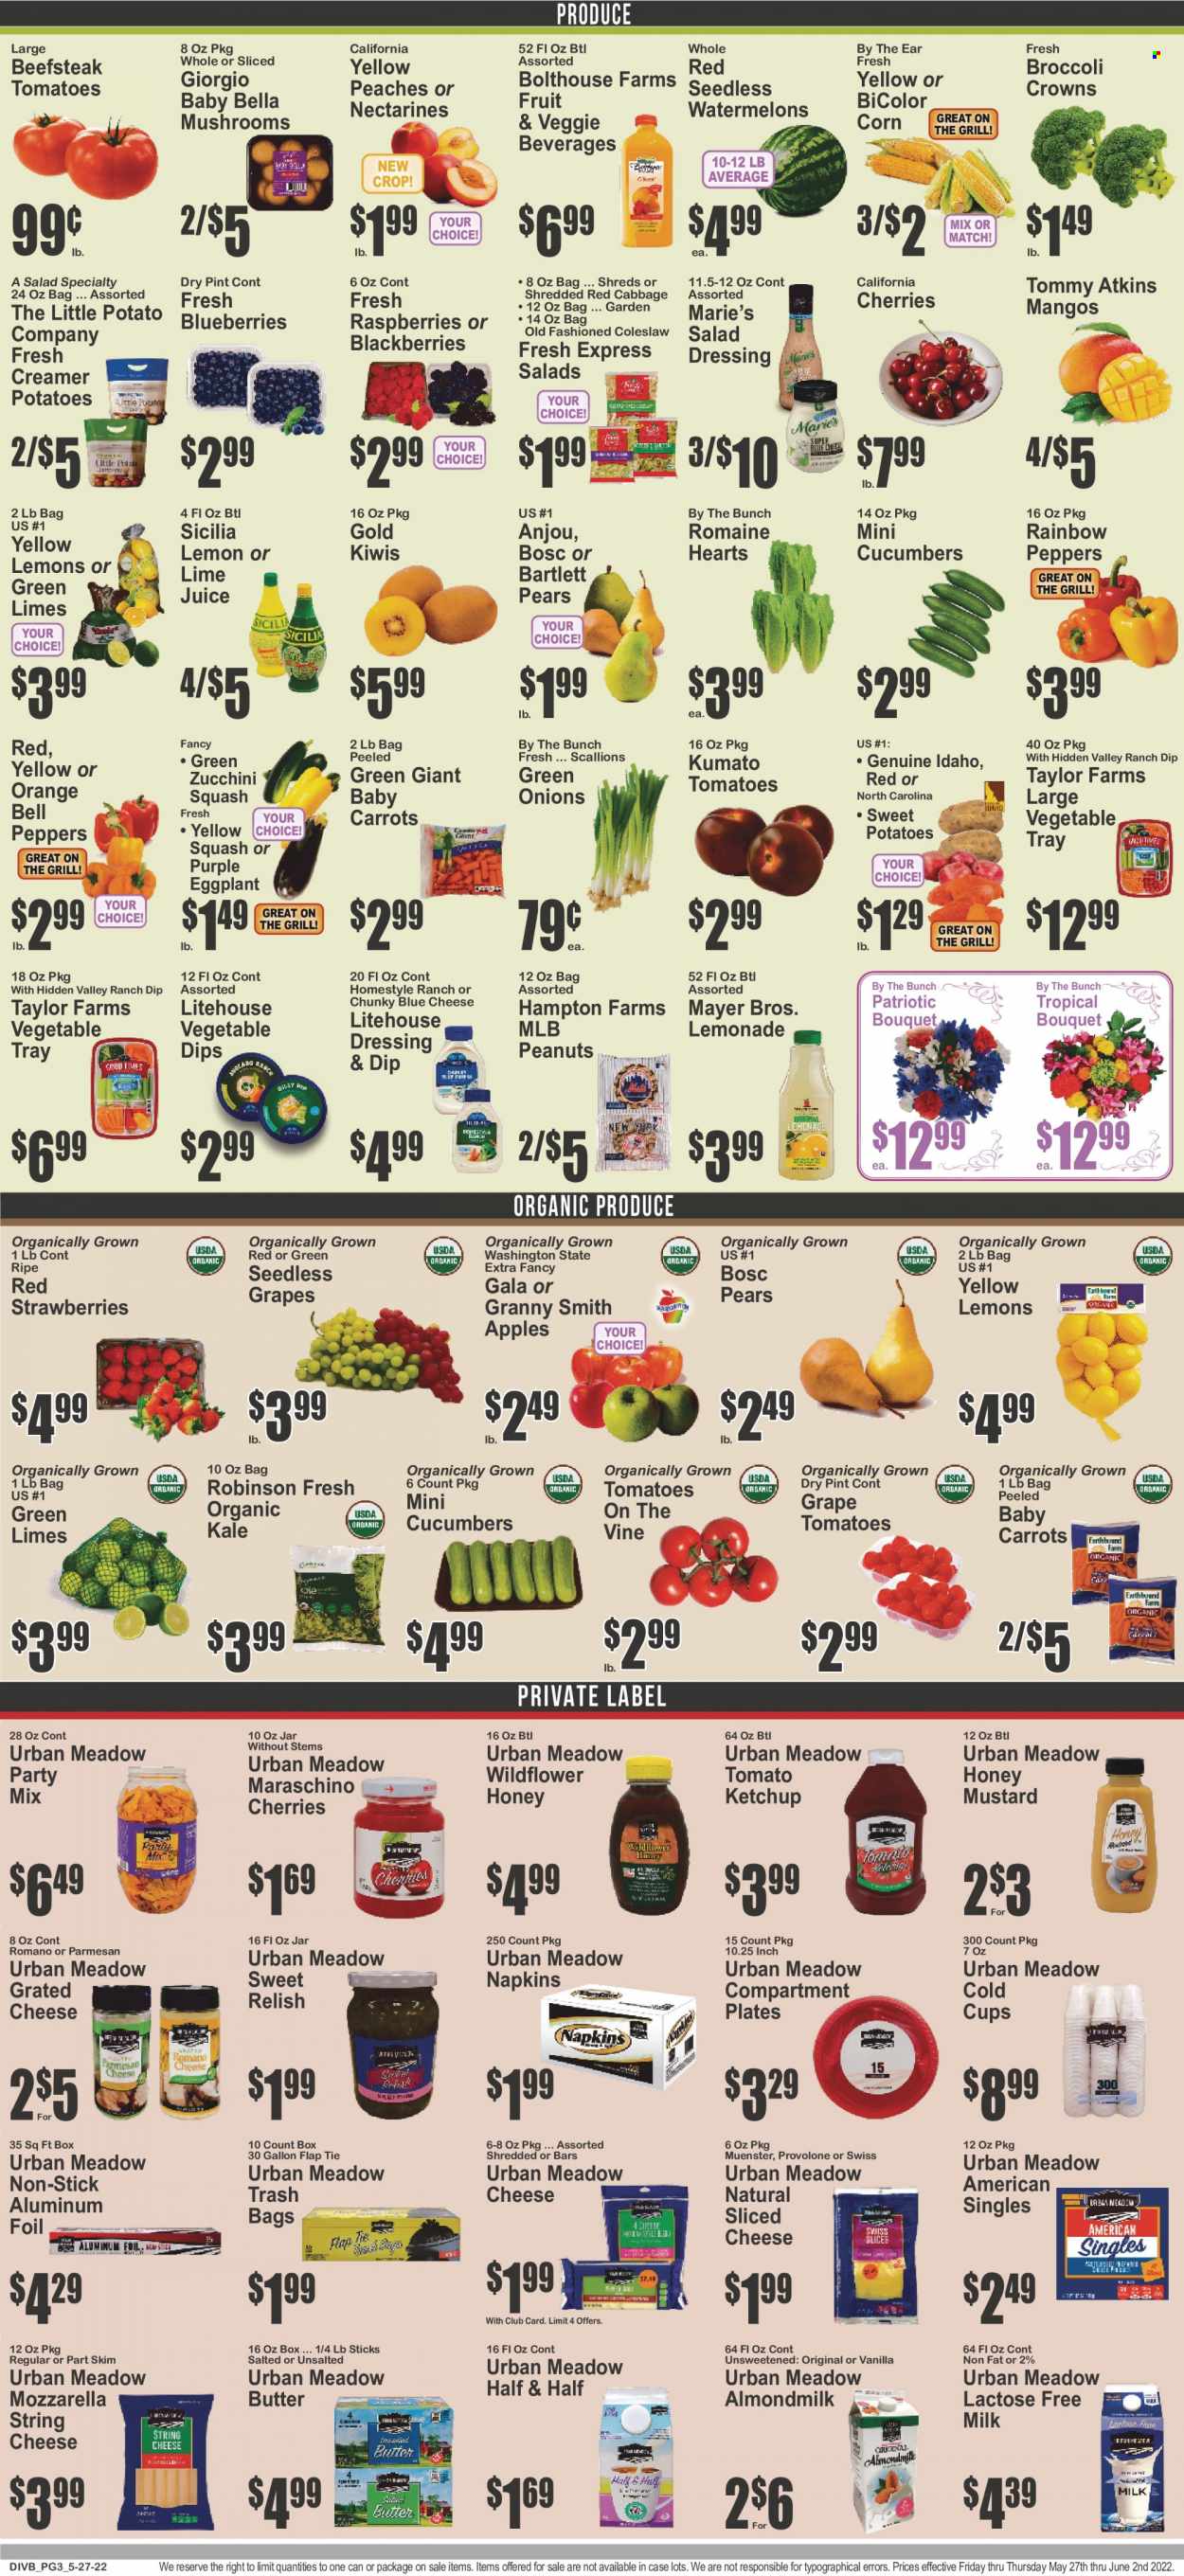 thumbnail - Super Fresh Flyer - 05/27/2022 - 06/02/2022 - Sales products - mushrooms, bell peppers, cabbage, carrots, corn, cucumber, sweet potato, tomatoes, zucchini, kale, potatoes, peppers, eggplant, apples, Bartlett pears, blackberries, Gala, kiwi, limes, seedless grapes, strawberries, pears, oranges, Granny Smith, coleslaw, mozzarella, sliced cheese, string cheese, parmesan, Münster cheese, grated cheese, Provolone, almond milk, milk, lactose free milk, butter, dip, Maraschino cherries, mustard, salad dressing, honey mustard, ketchup, dressing, peanuts, lemonade, napkins, nectarines, Half and half, lemons, peaches. Page 3.